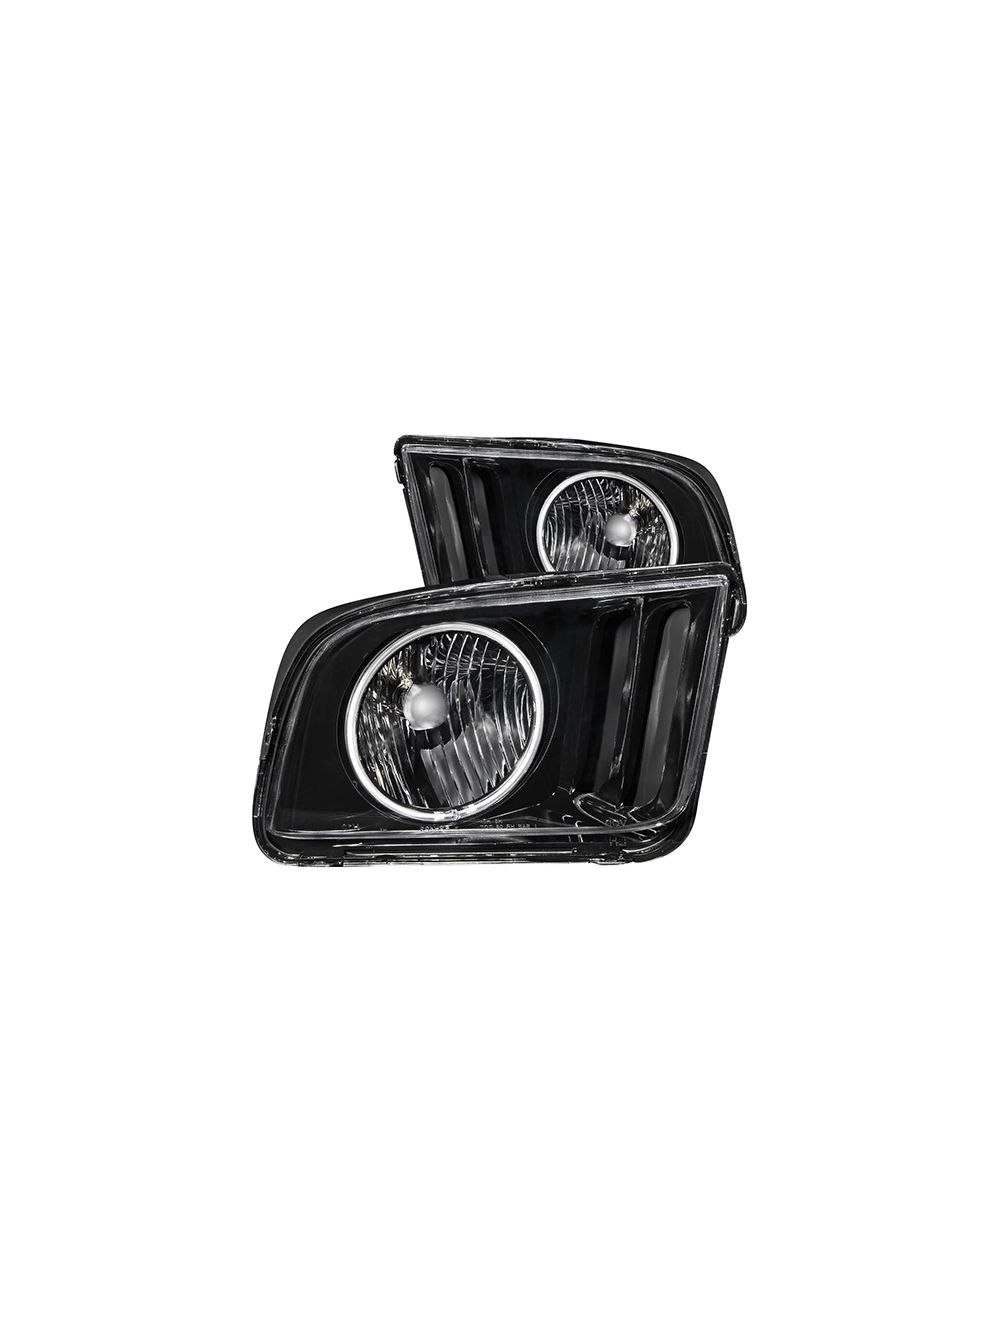 Anzo ANZ121033 Black with Halo CCFL Headlights for Ford 2005 - 2009 Mustang